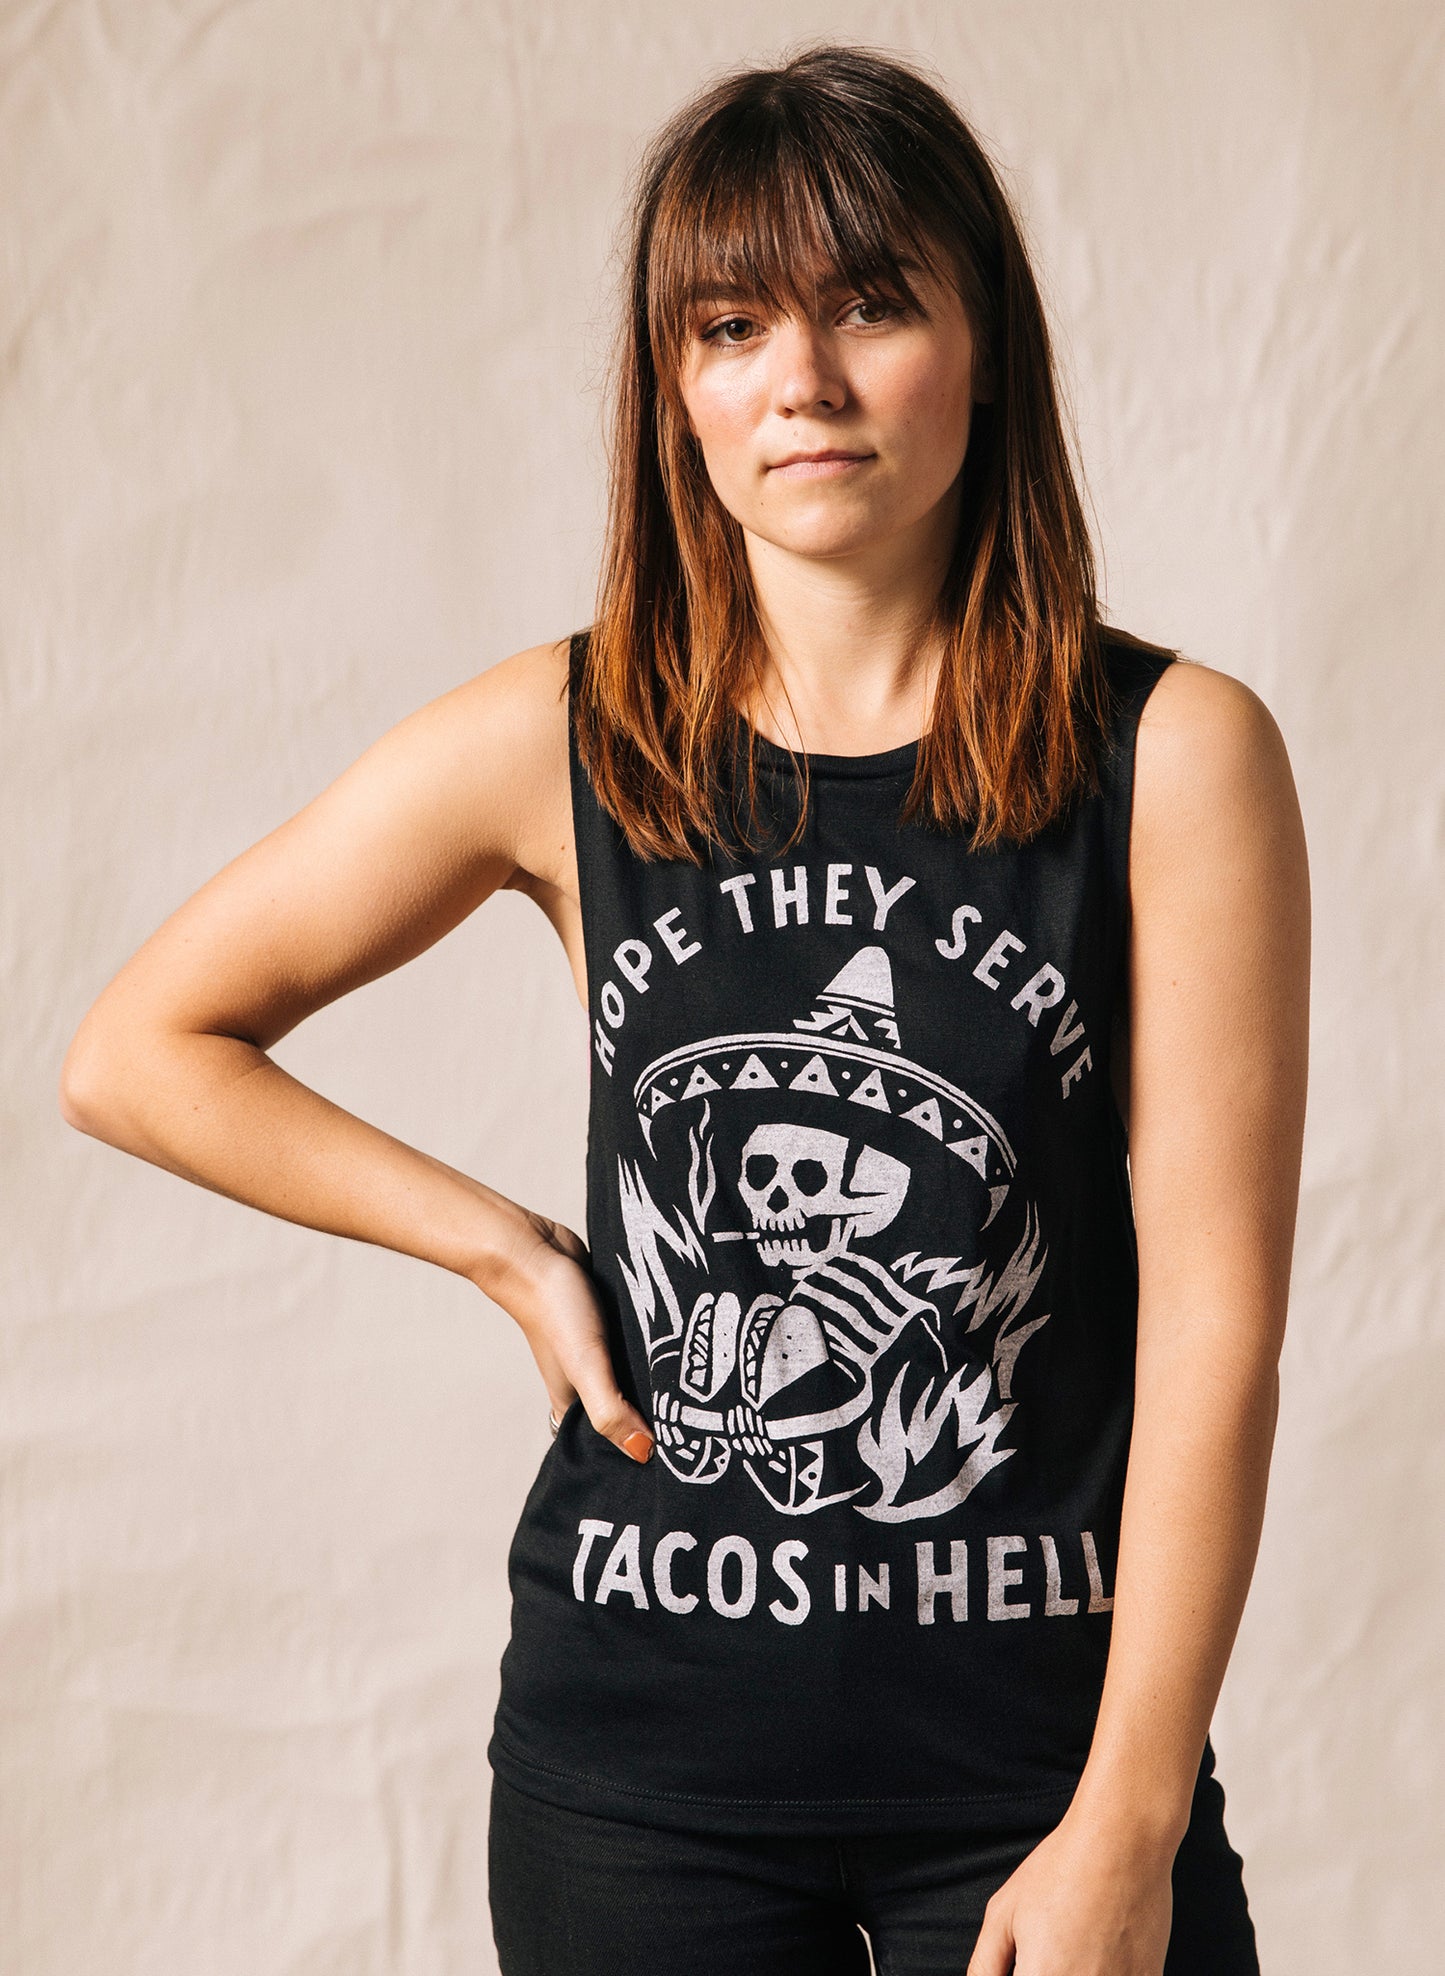 Hope They Serve Tacos in Hell Taco Meme Women's Muscle Tank - Best Taco Shirt for Foodies and Taco Lovers